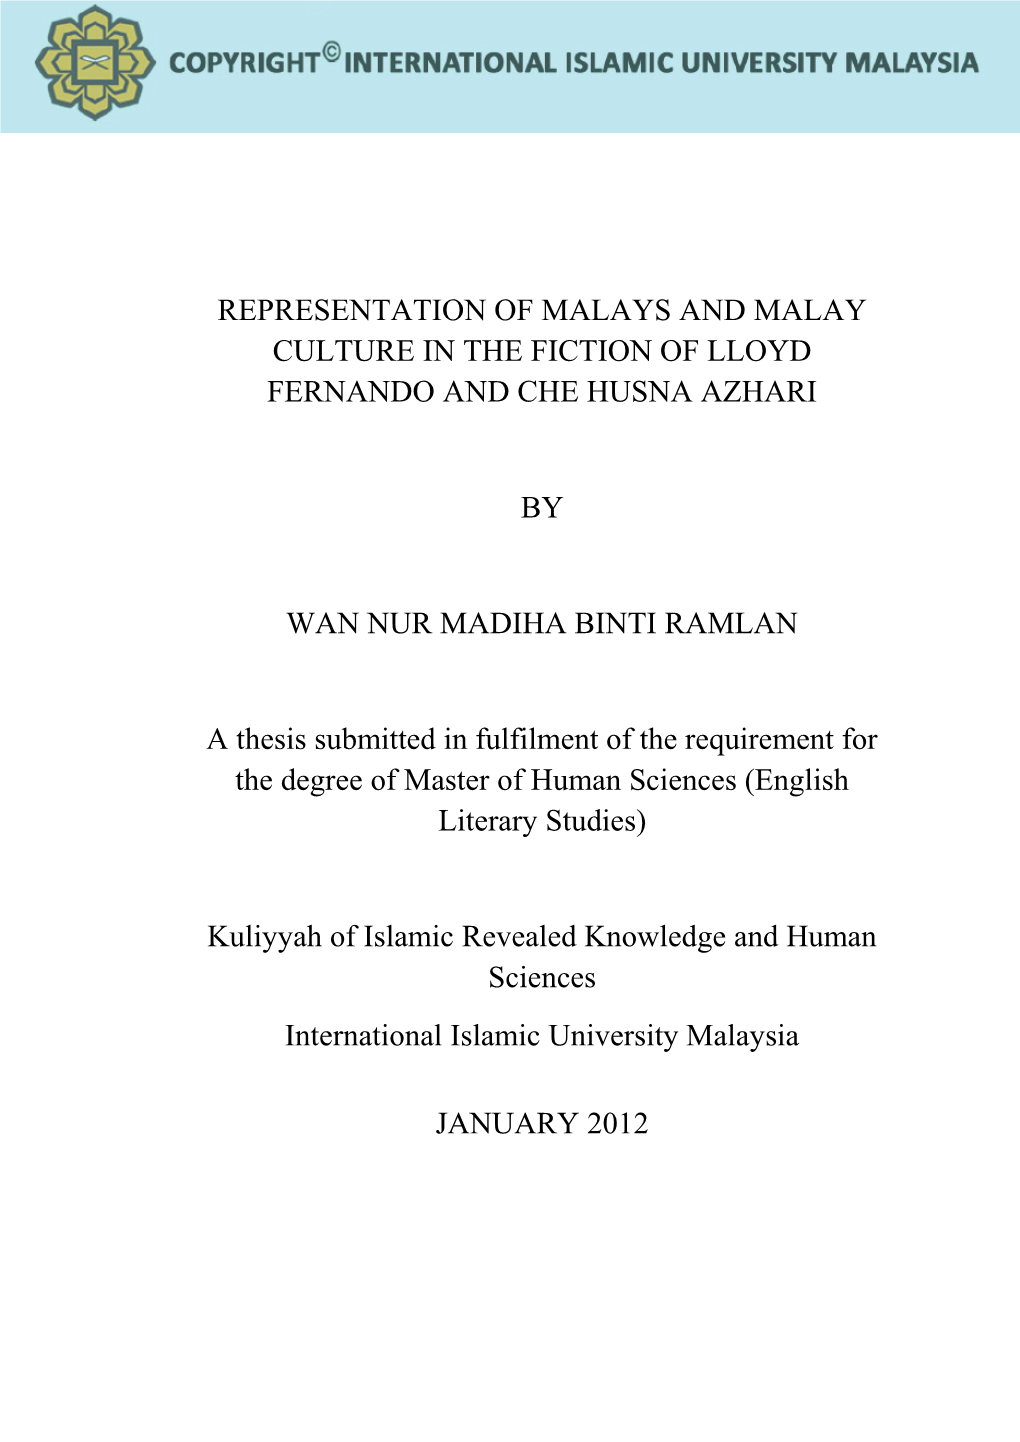 Representation of Malays and Malay Culture in the Fiction of Lloyd Fernando and Che Husna Azhari